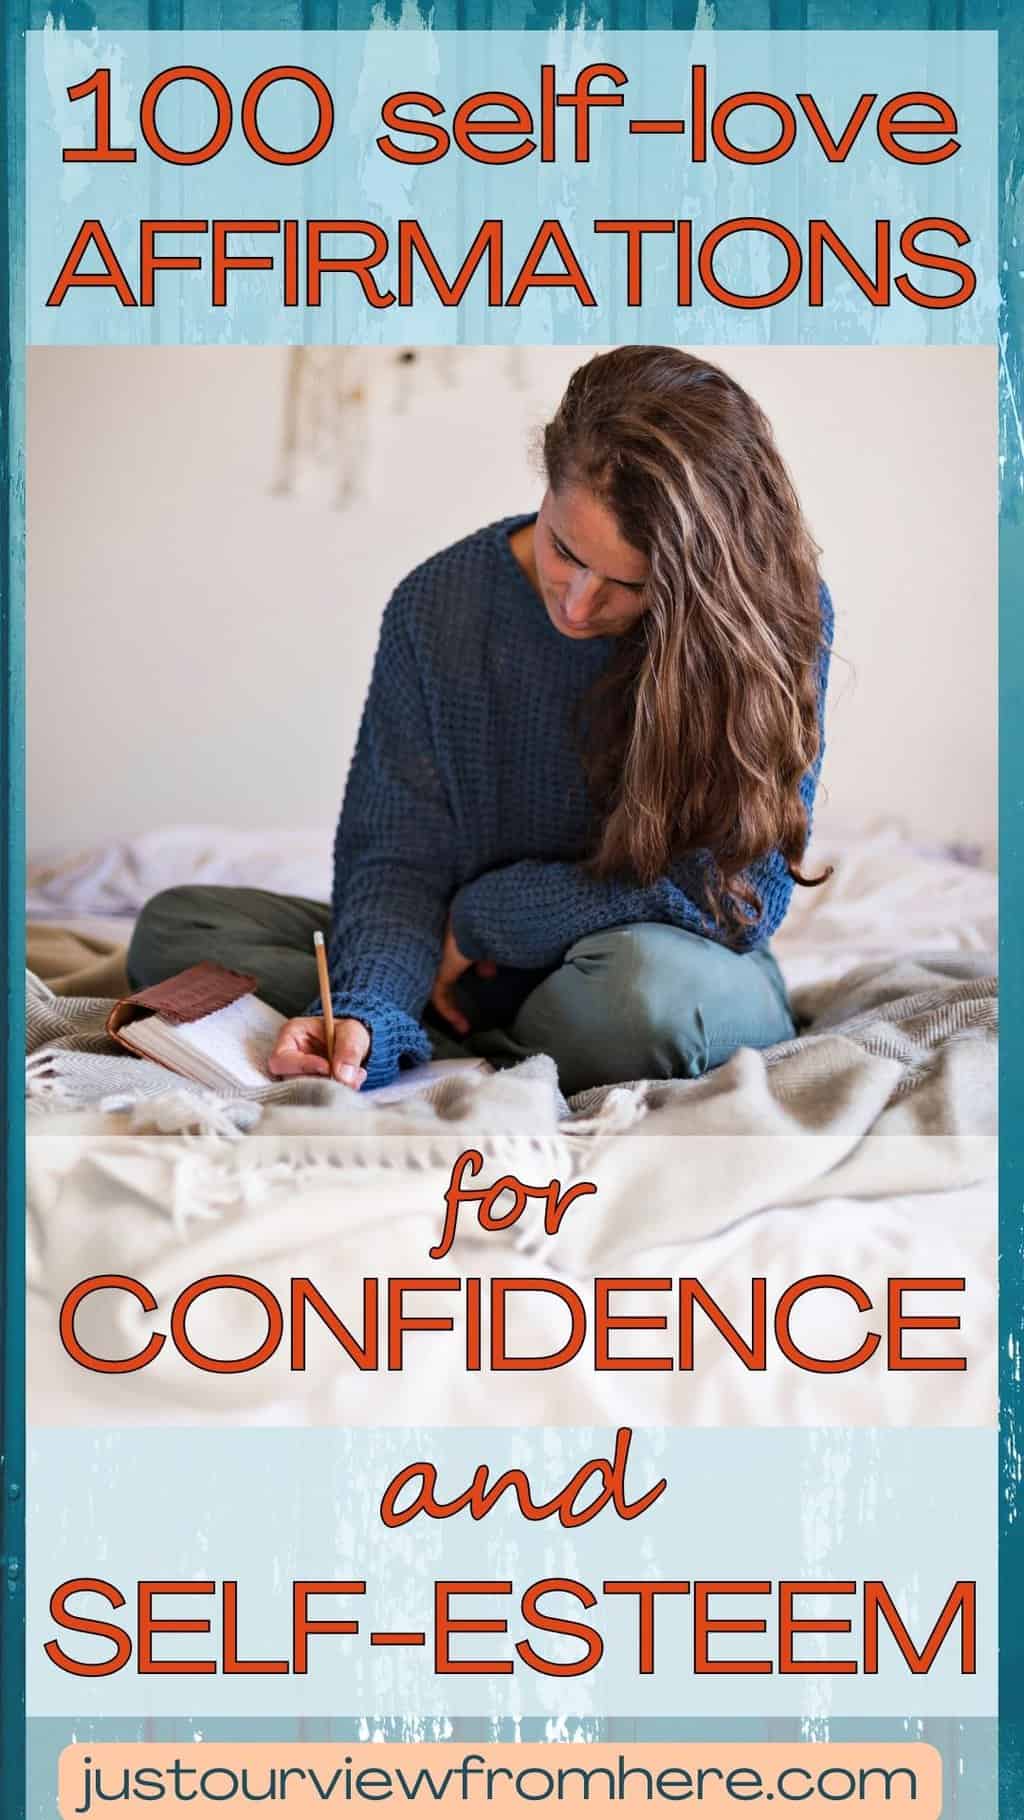 woman sitting on bed writing in a journal, text overlay 100 self-love affirmations for confidence and self-esteem